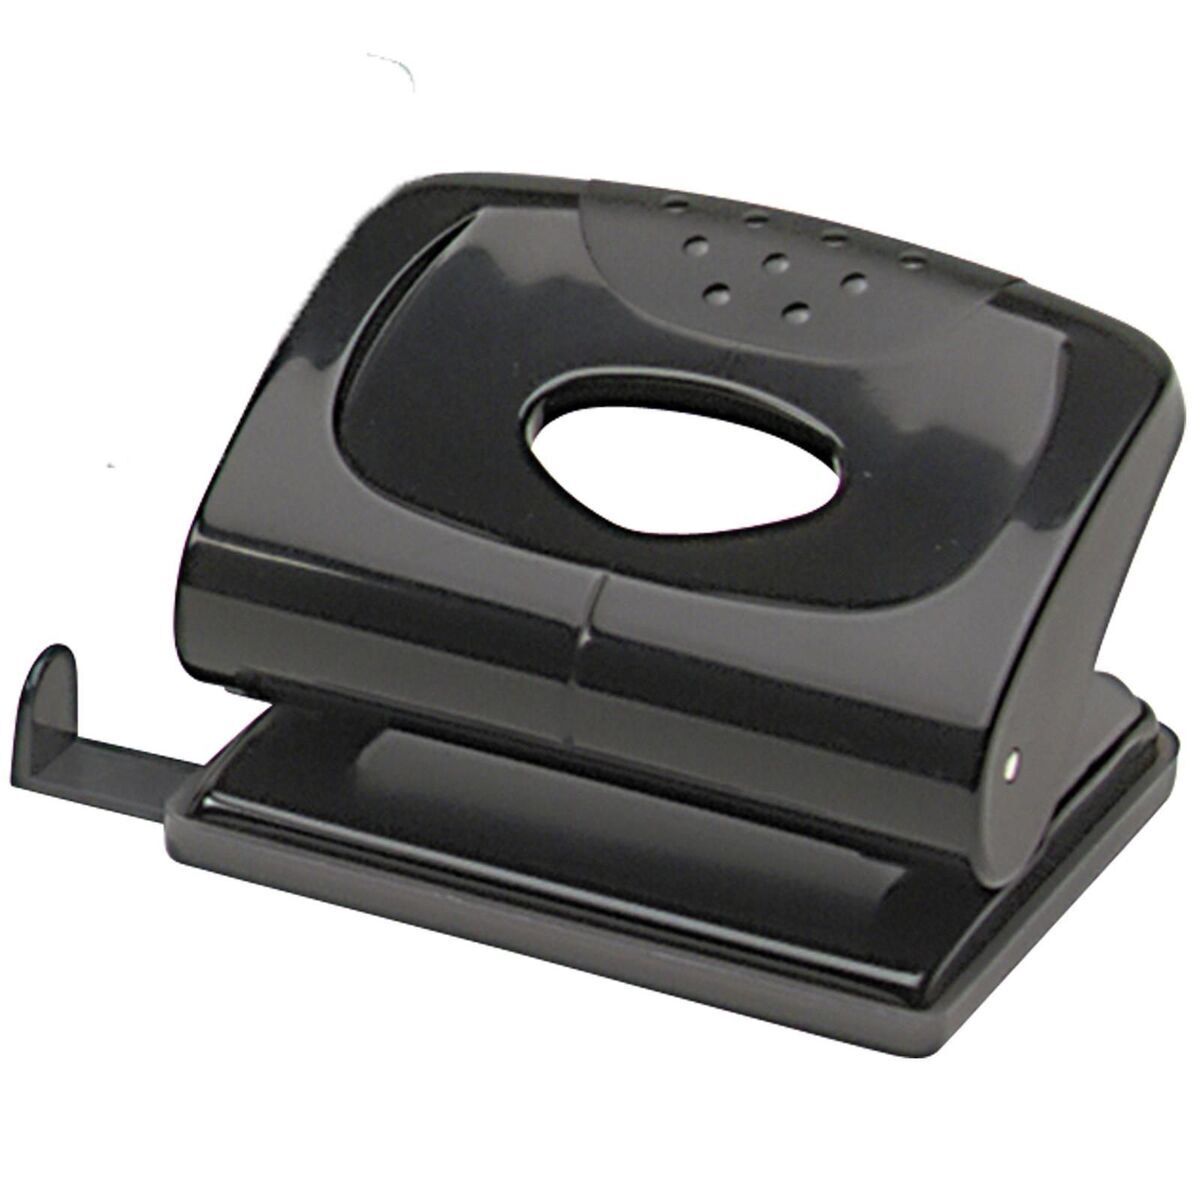 Quill Brand® Black 3-Hole Punch, 30 Sheet Capacity